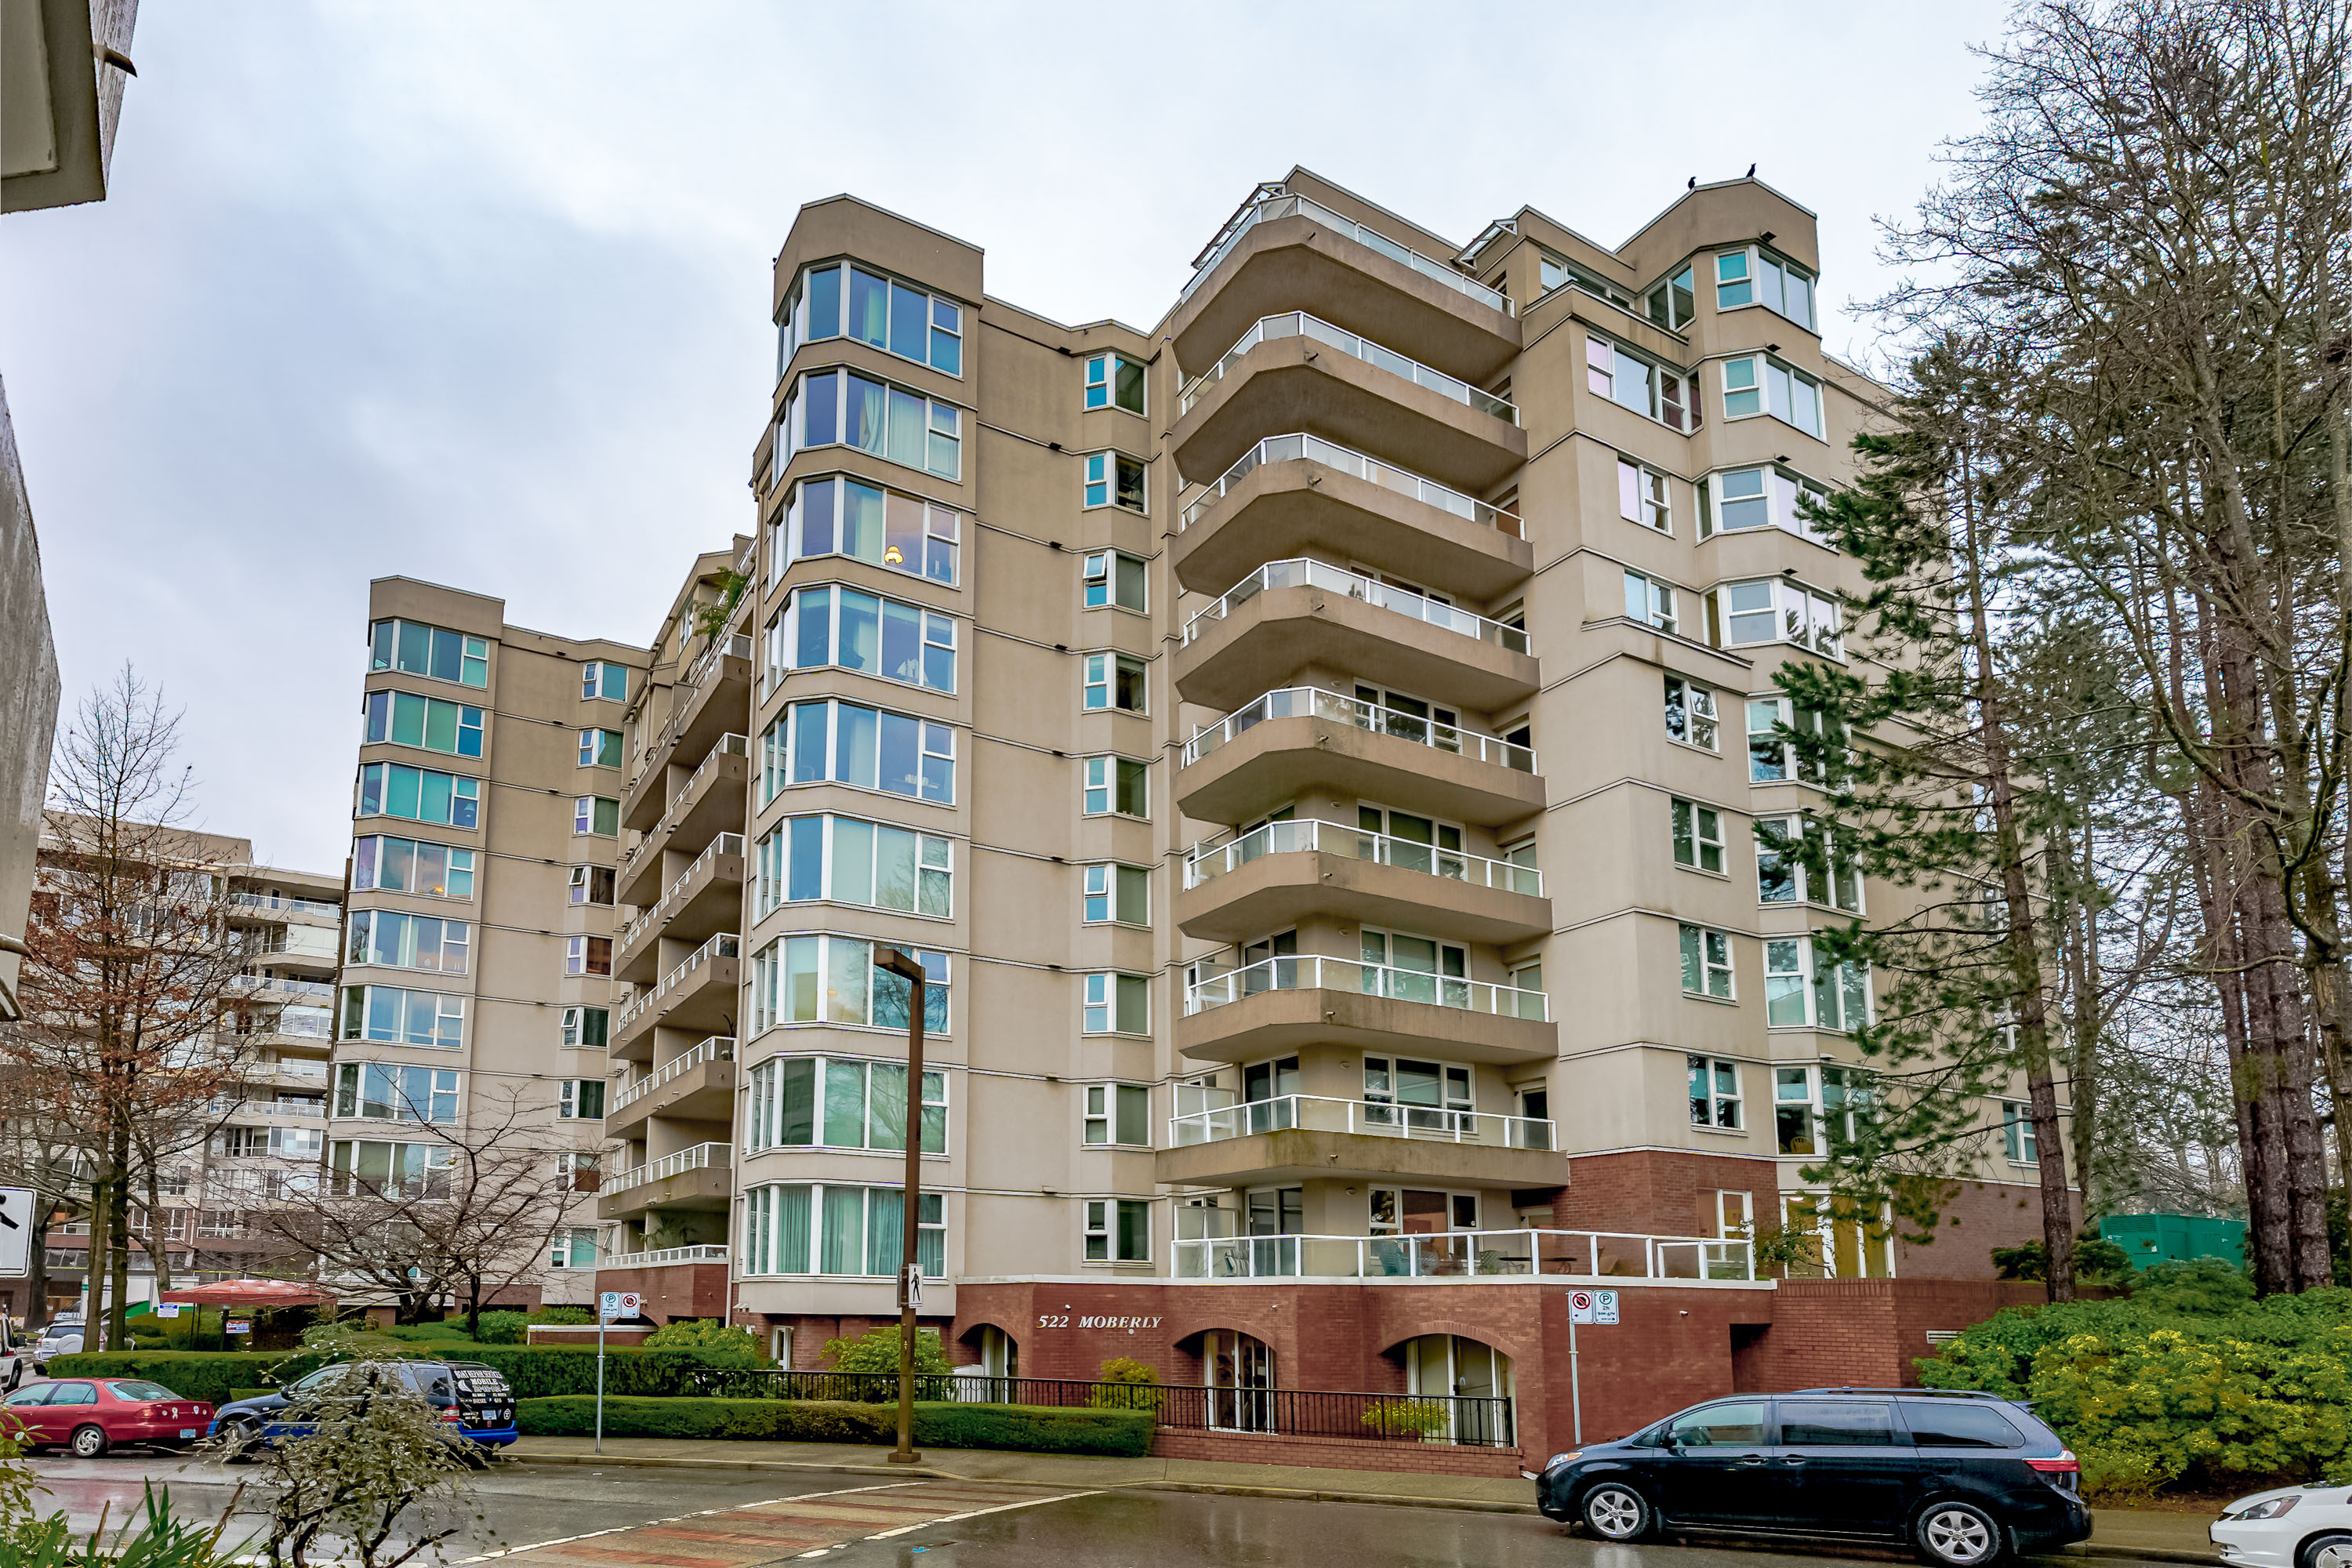 604 - 522 Moberly Road, Vancouver